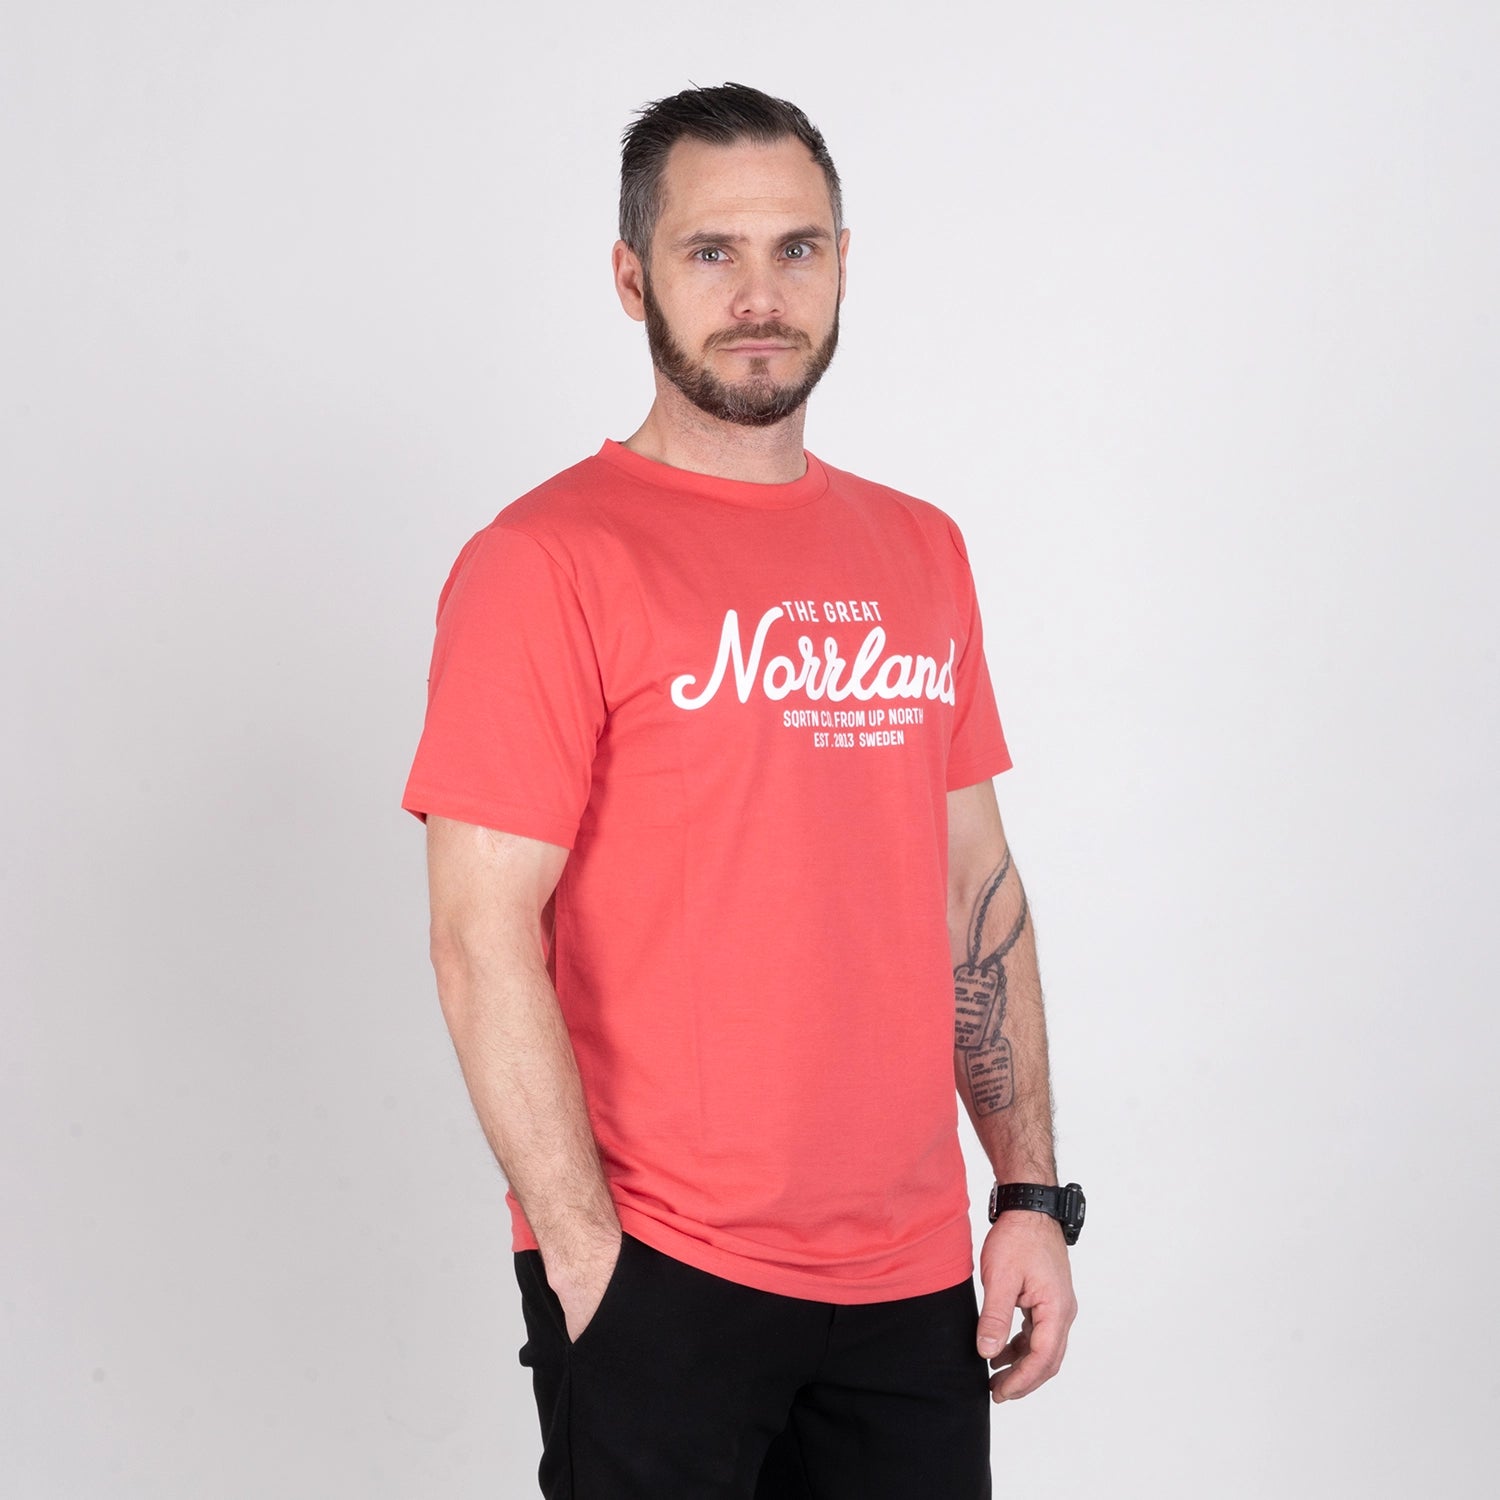 GREAT NORRLAND T-SHIRT - DESERT CORAL